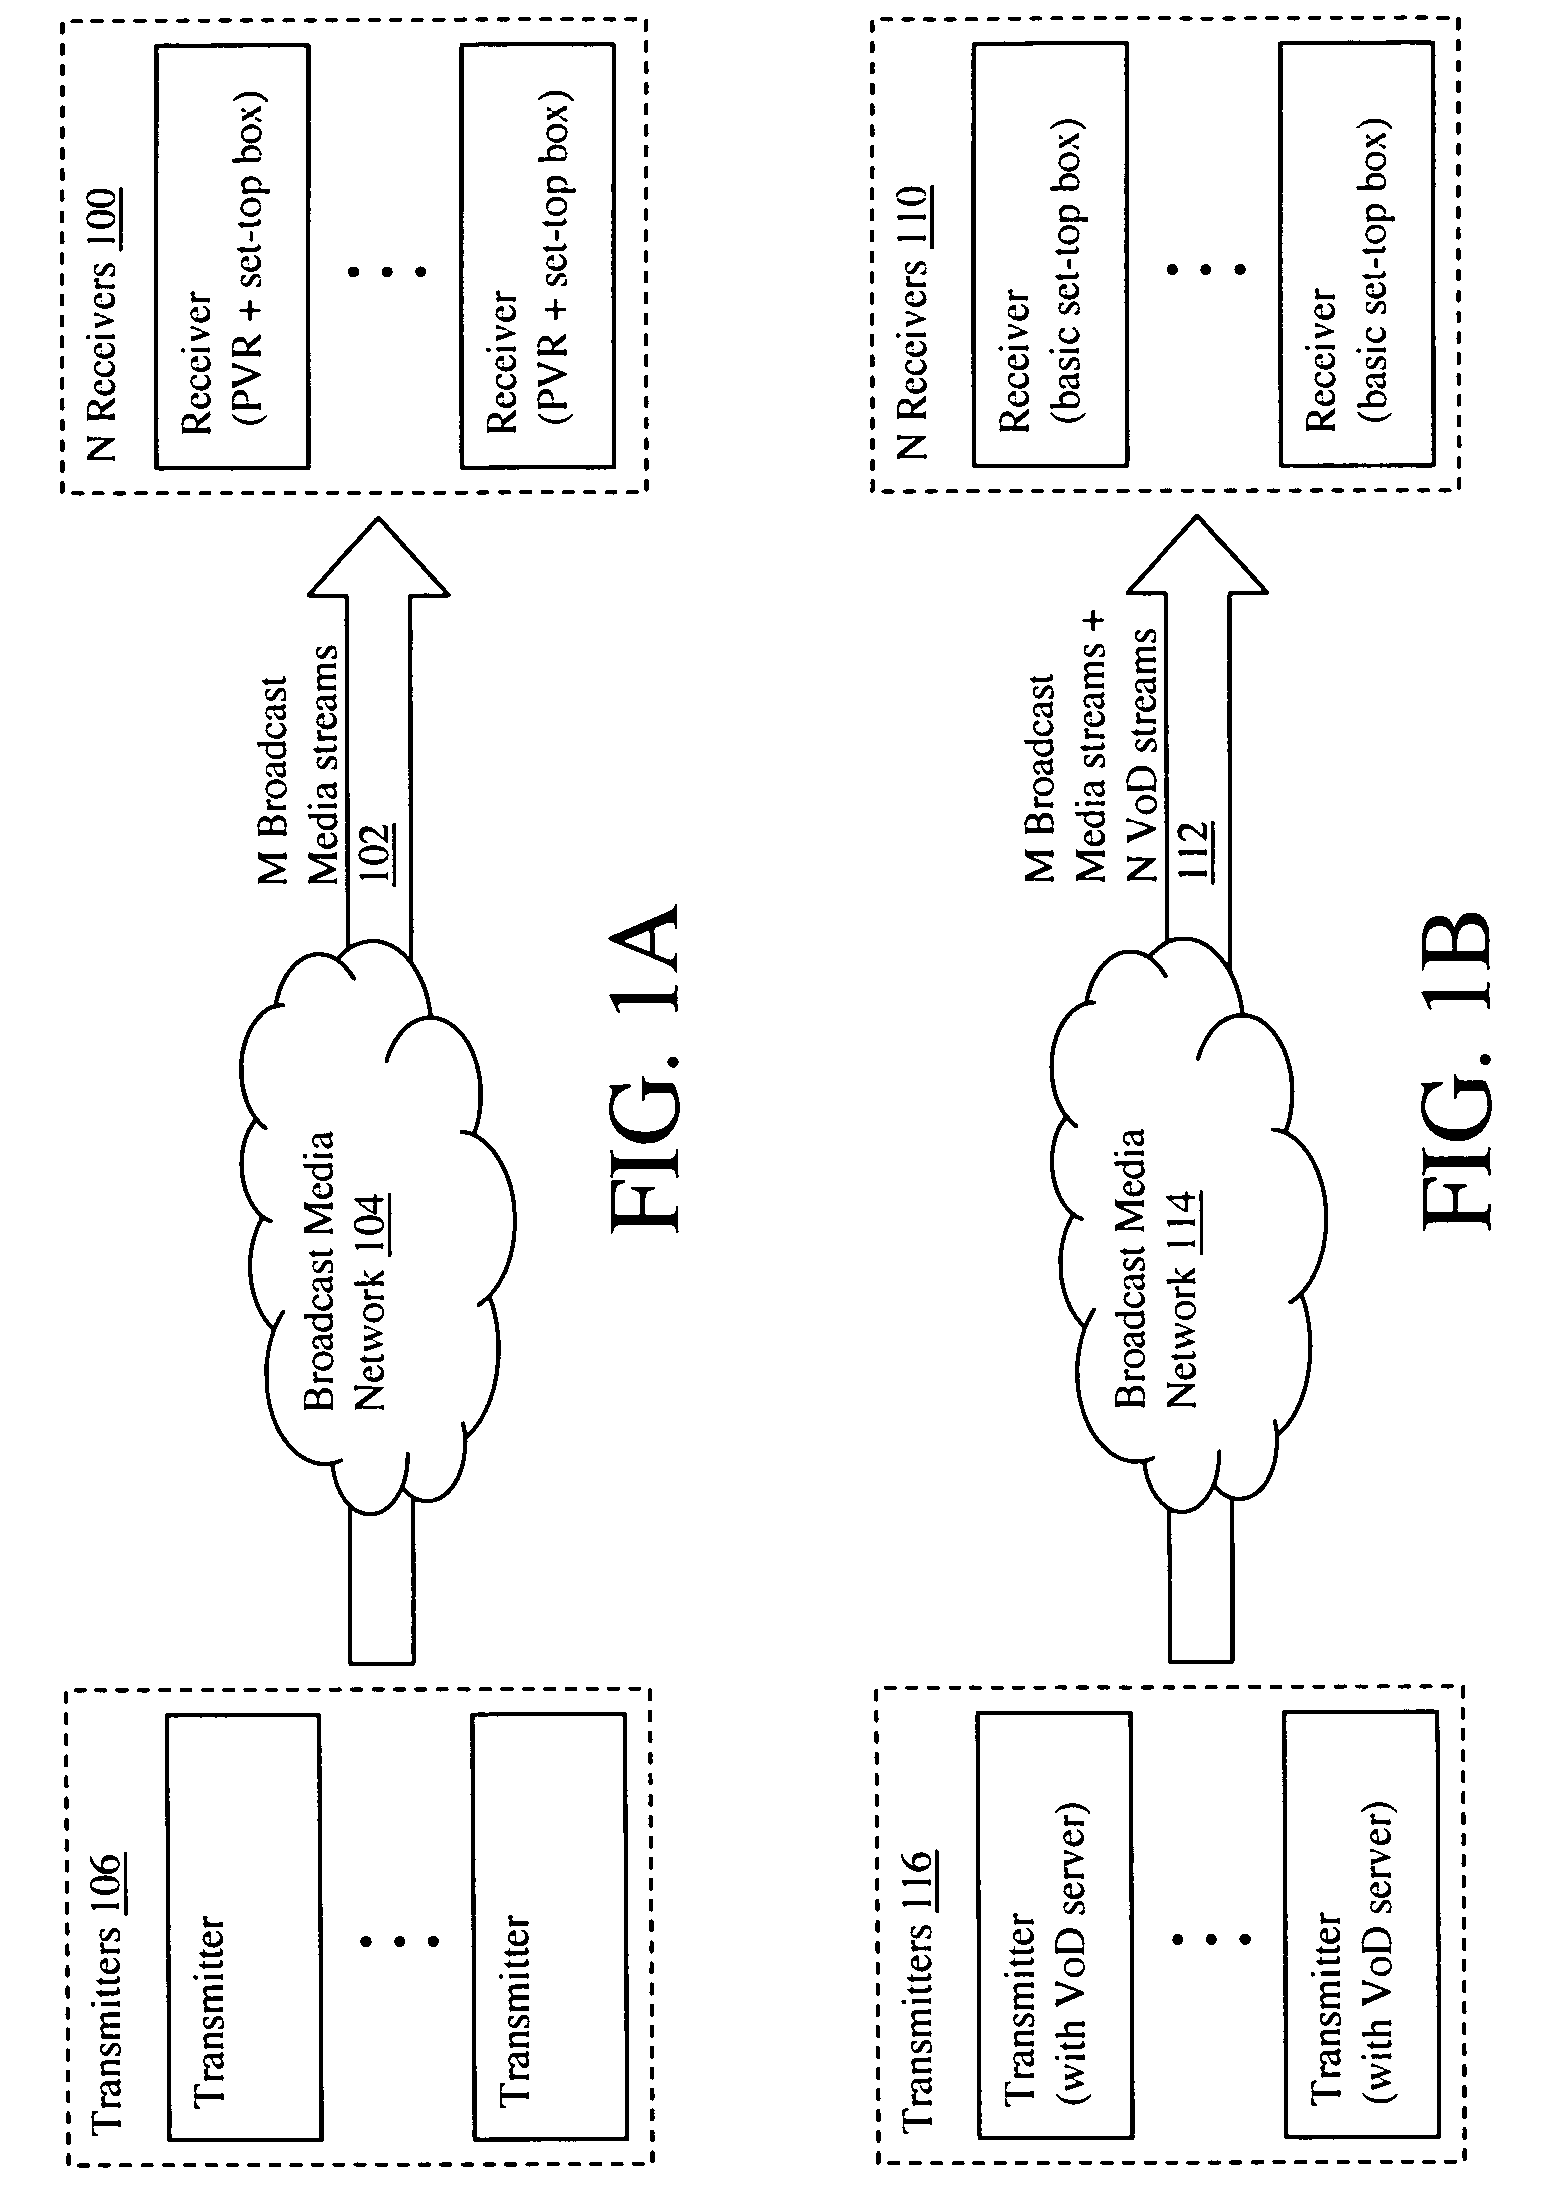 Multi-user personalized digital multimedia distribution methods and systems